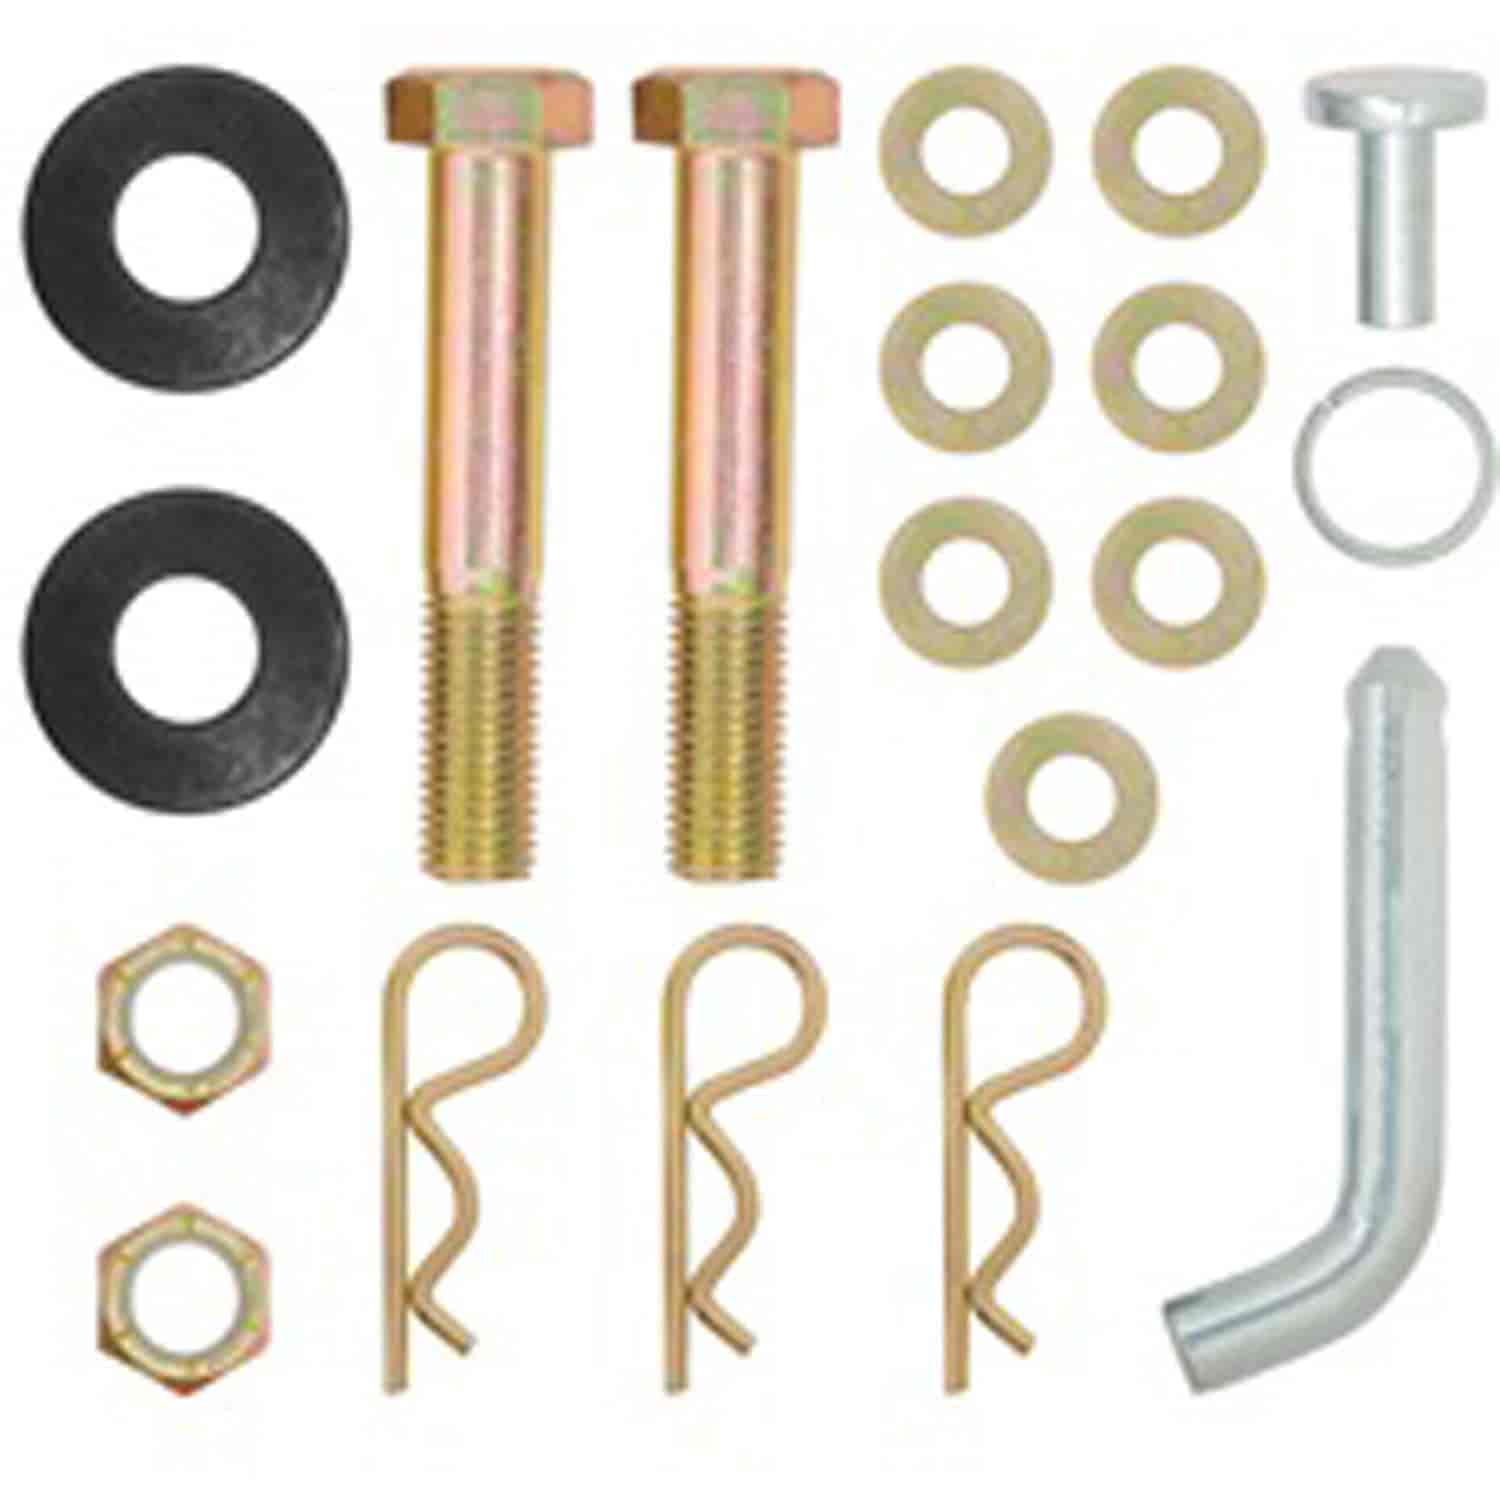 REPLACEMENT BOLT KIT FOR MV ROUND BAR WD